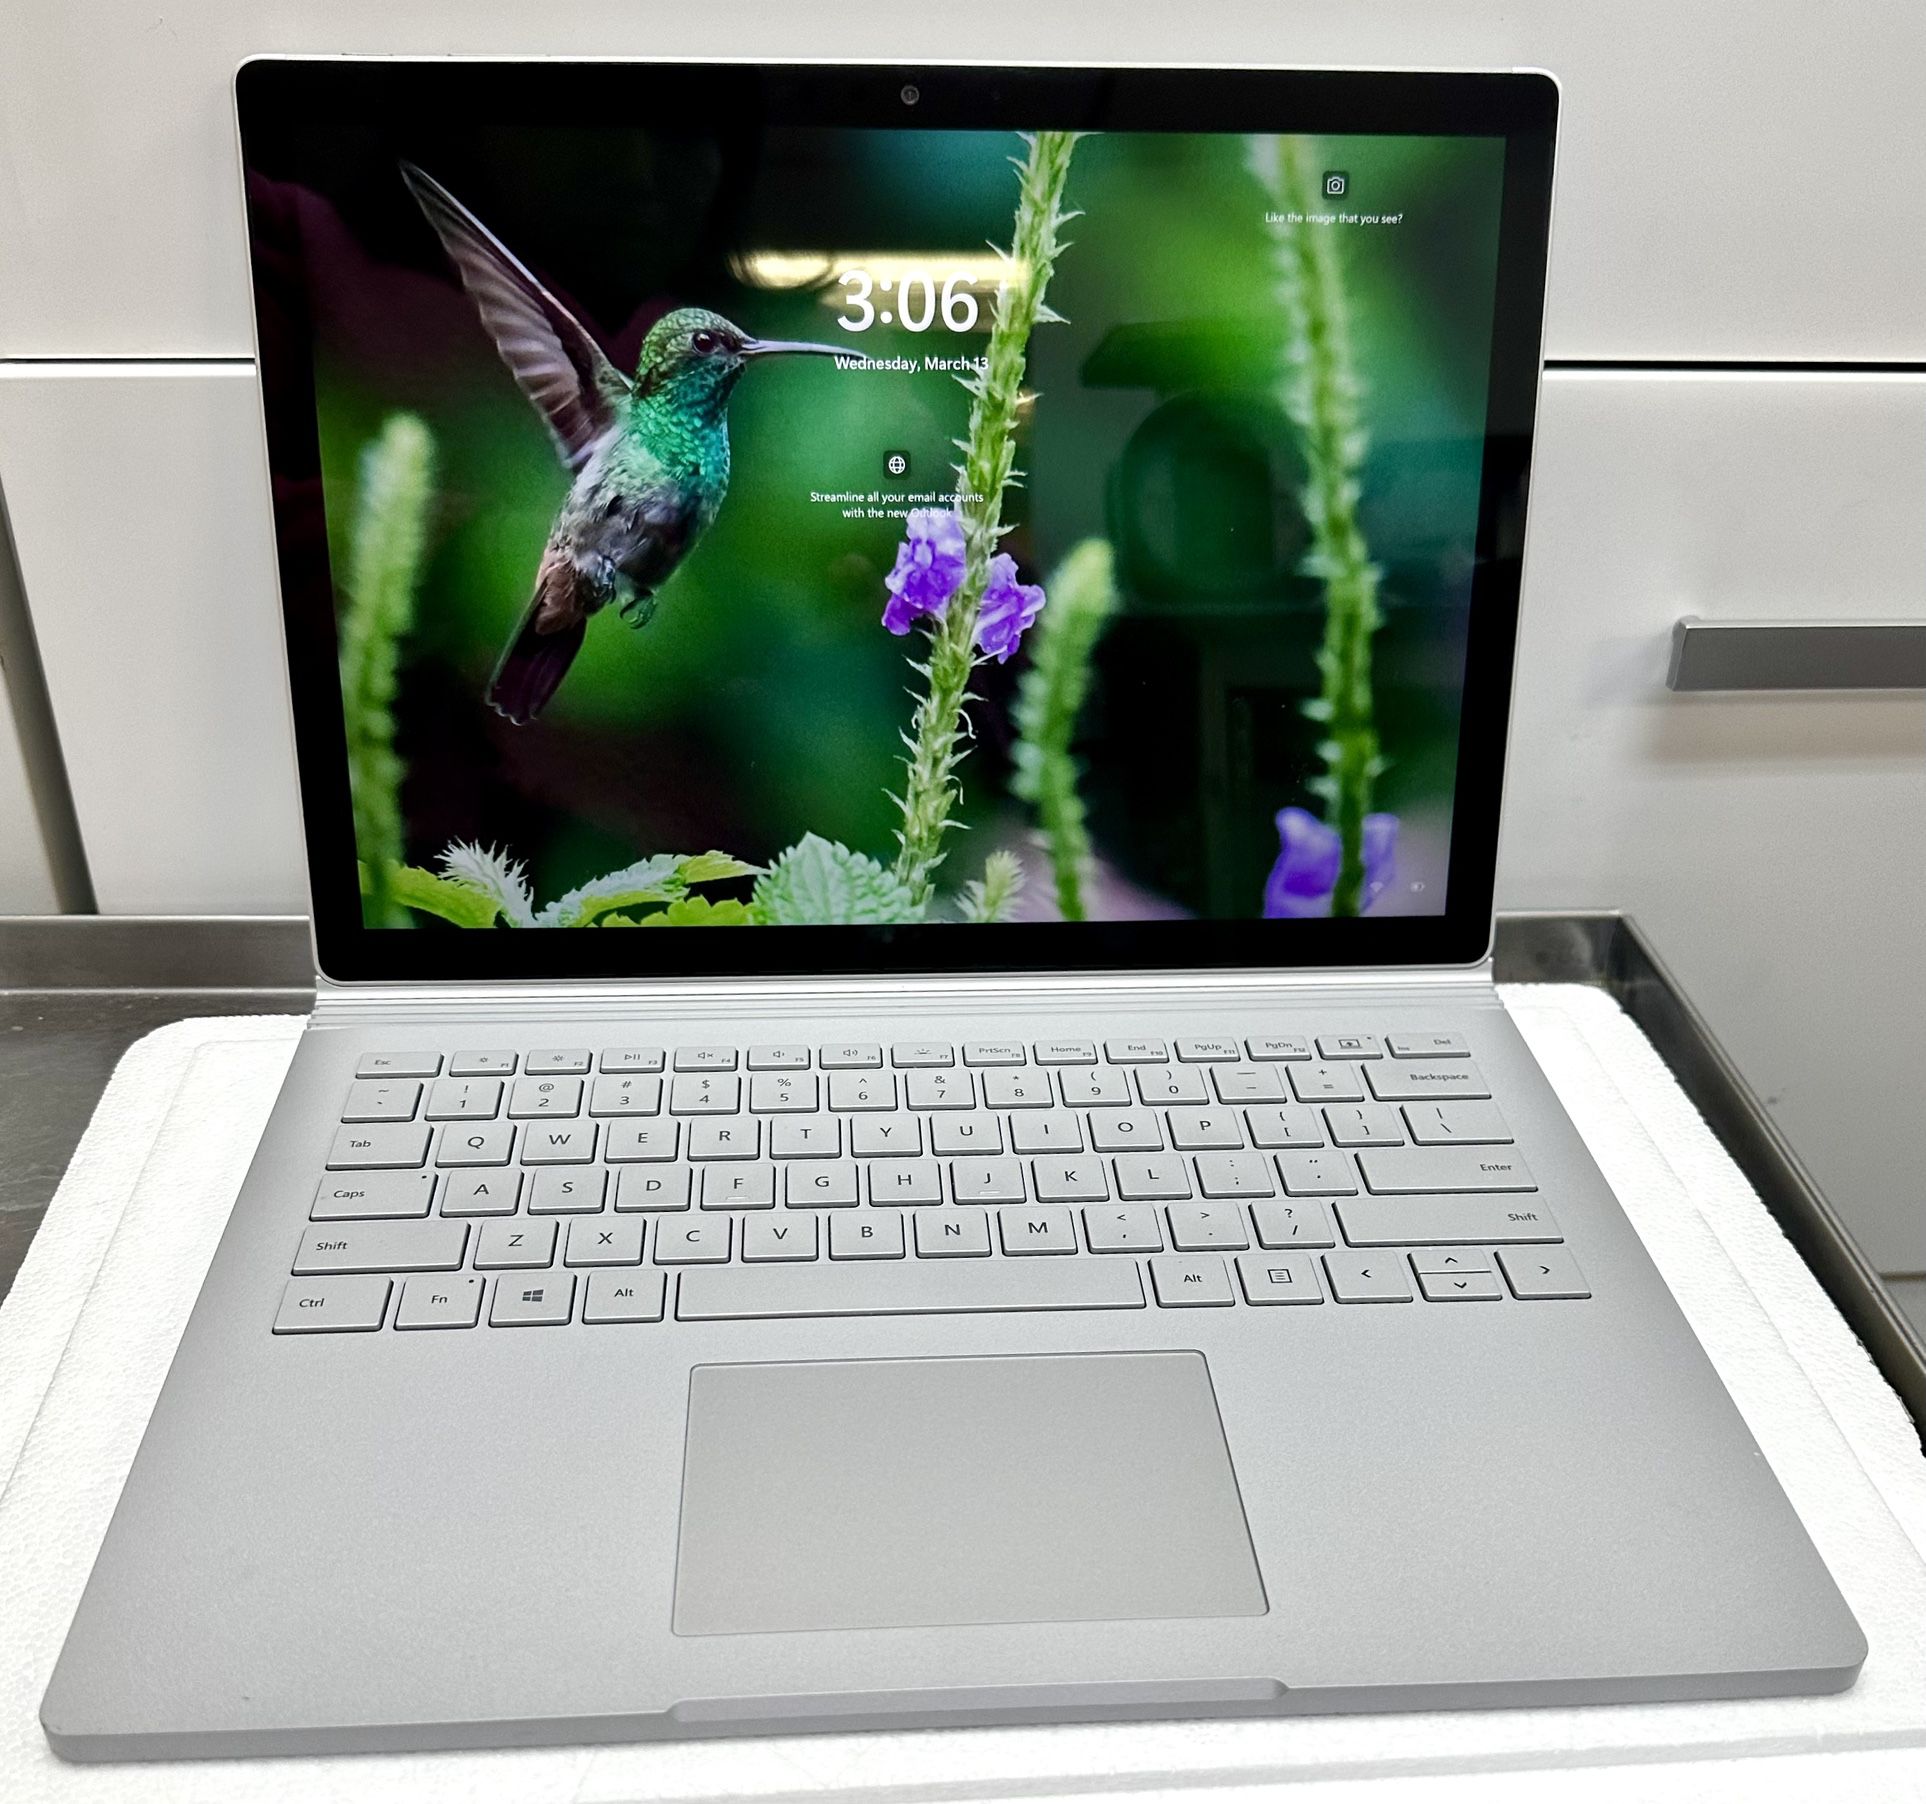 Microsoft Surface Book 2 13.5" 512GB SSD, Intel Core i7-8650U, 1.90GHz, 16GB RAM WINDOWS 11 PRO It works perfectly. The screen is flawless with the ni